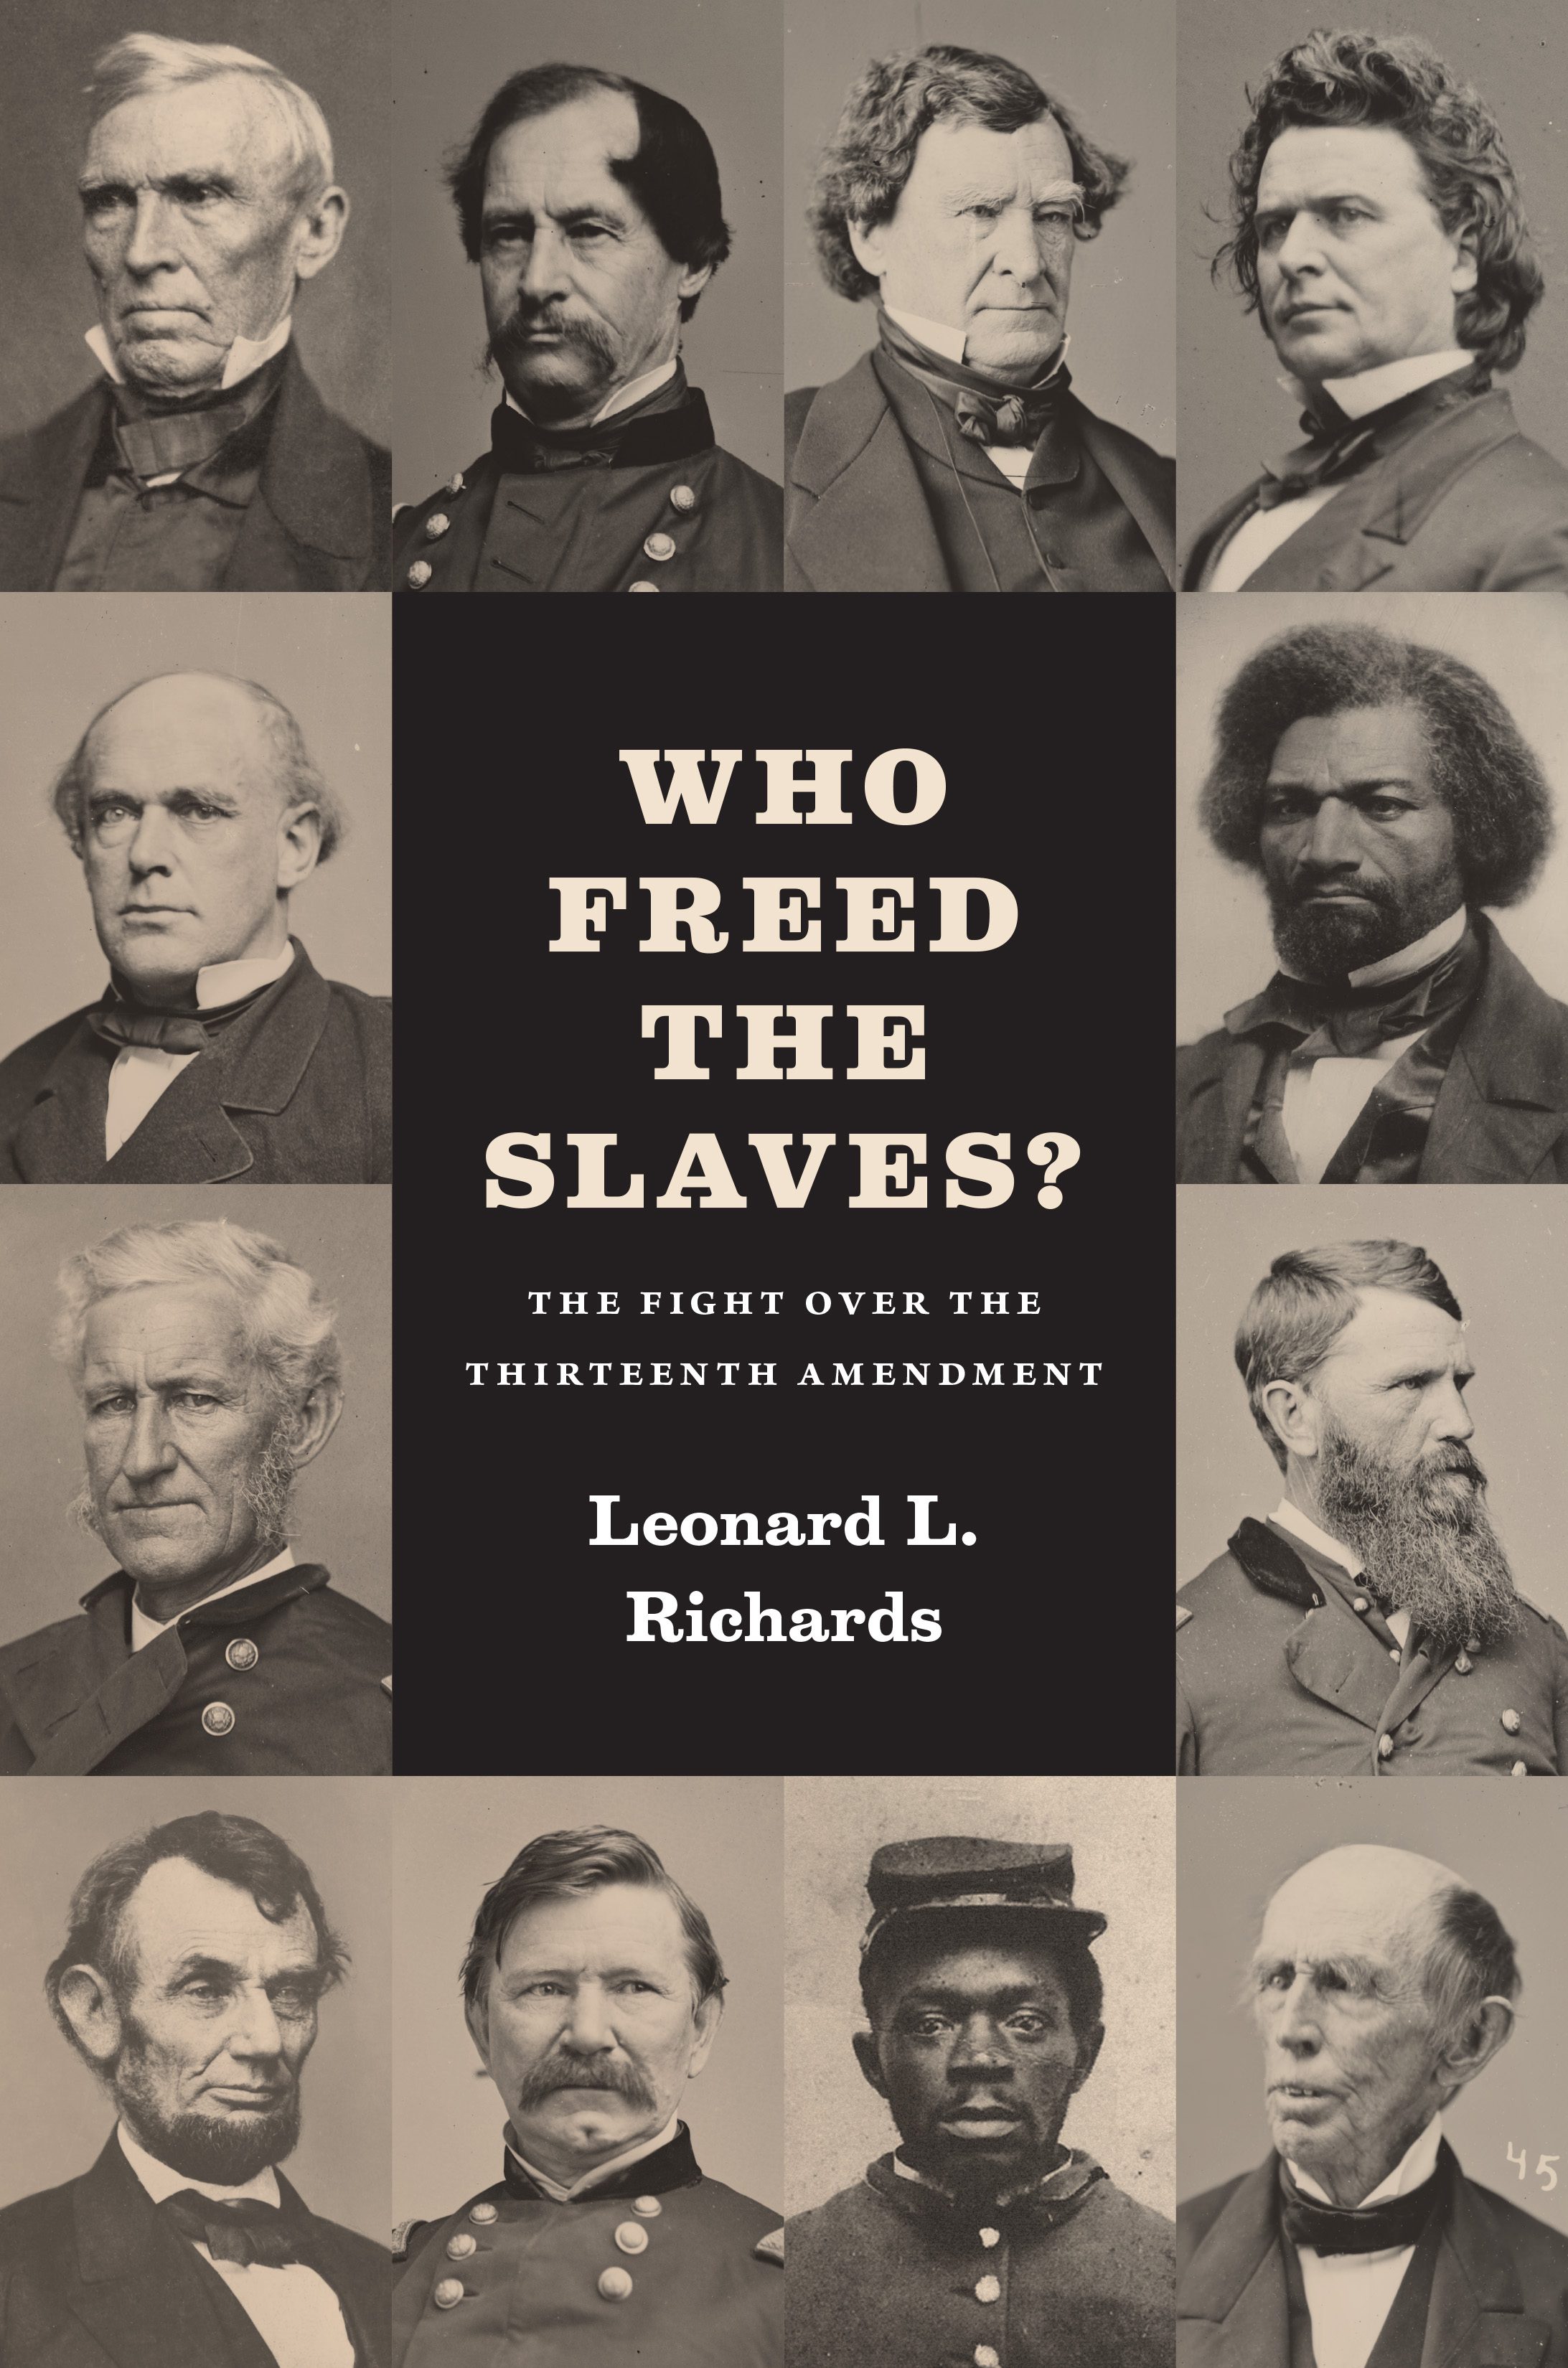 Who freed the slaves?